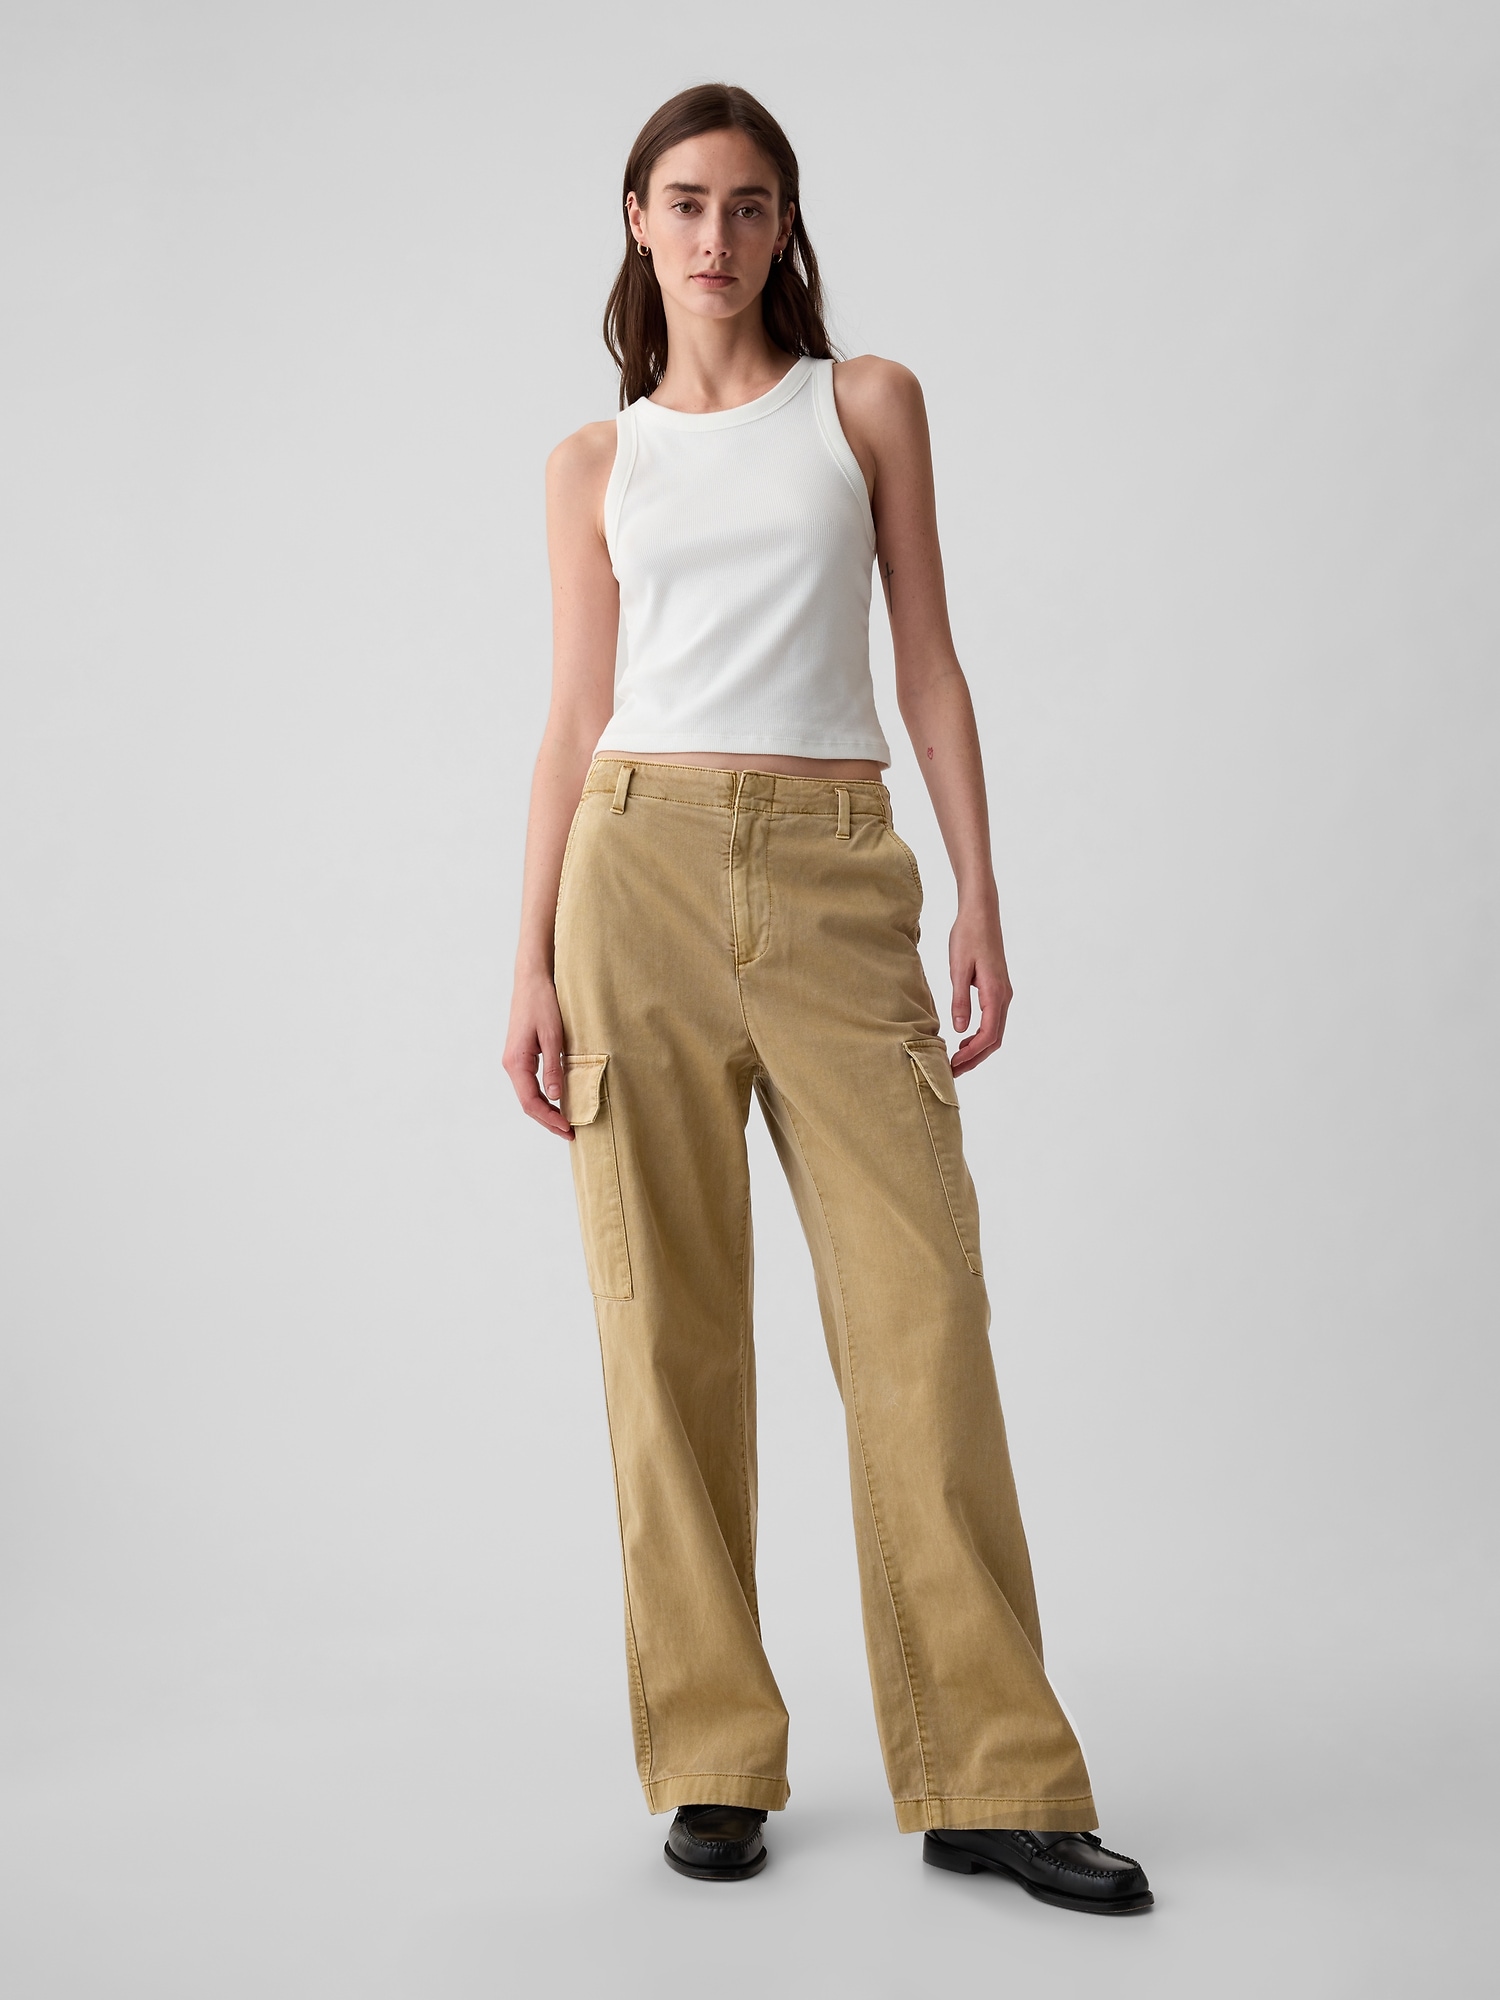 Deal of The Day Clearance Cargo Pants Women Straight Wide Leg